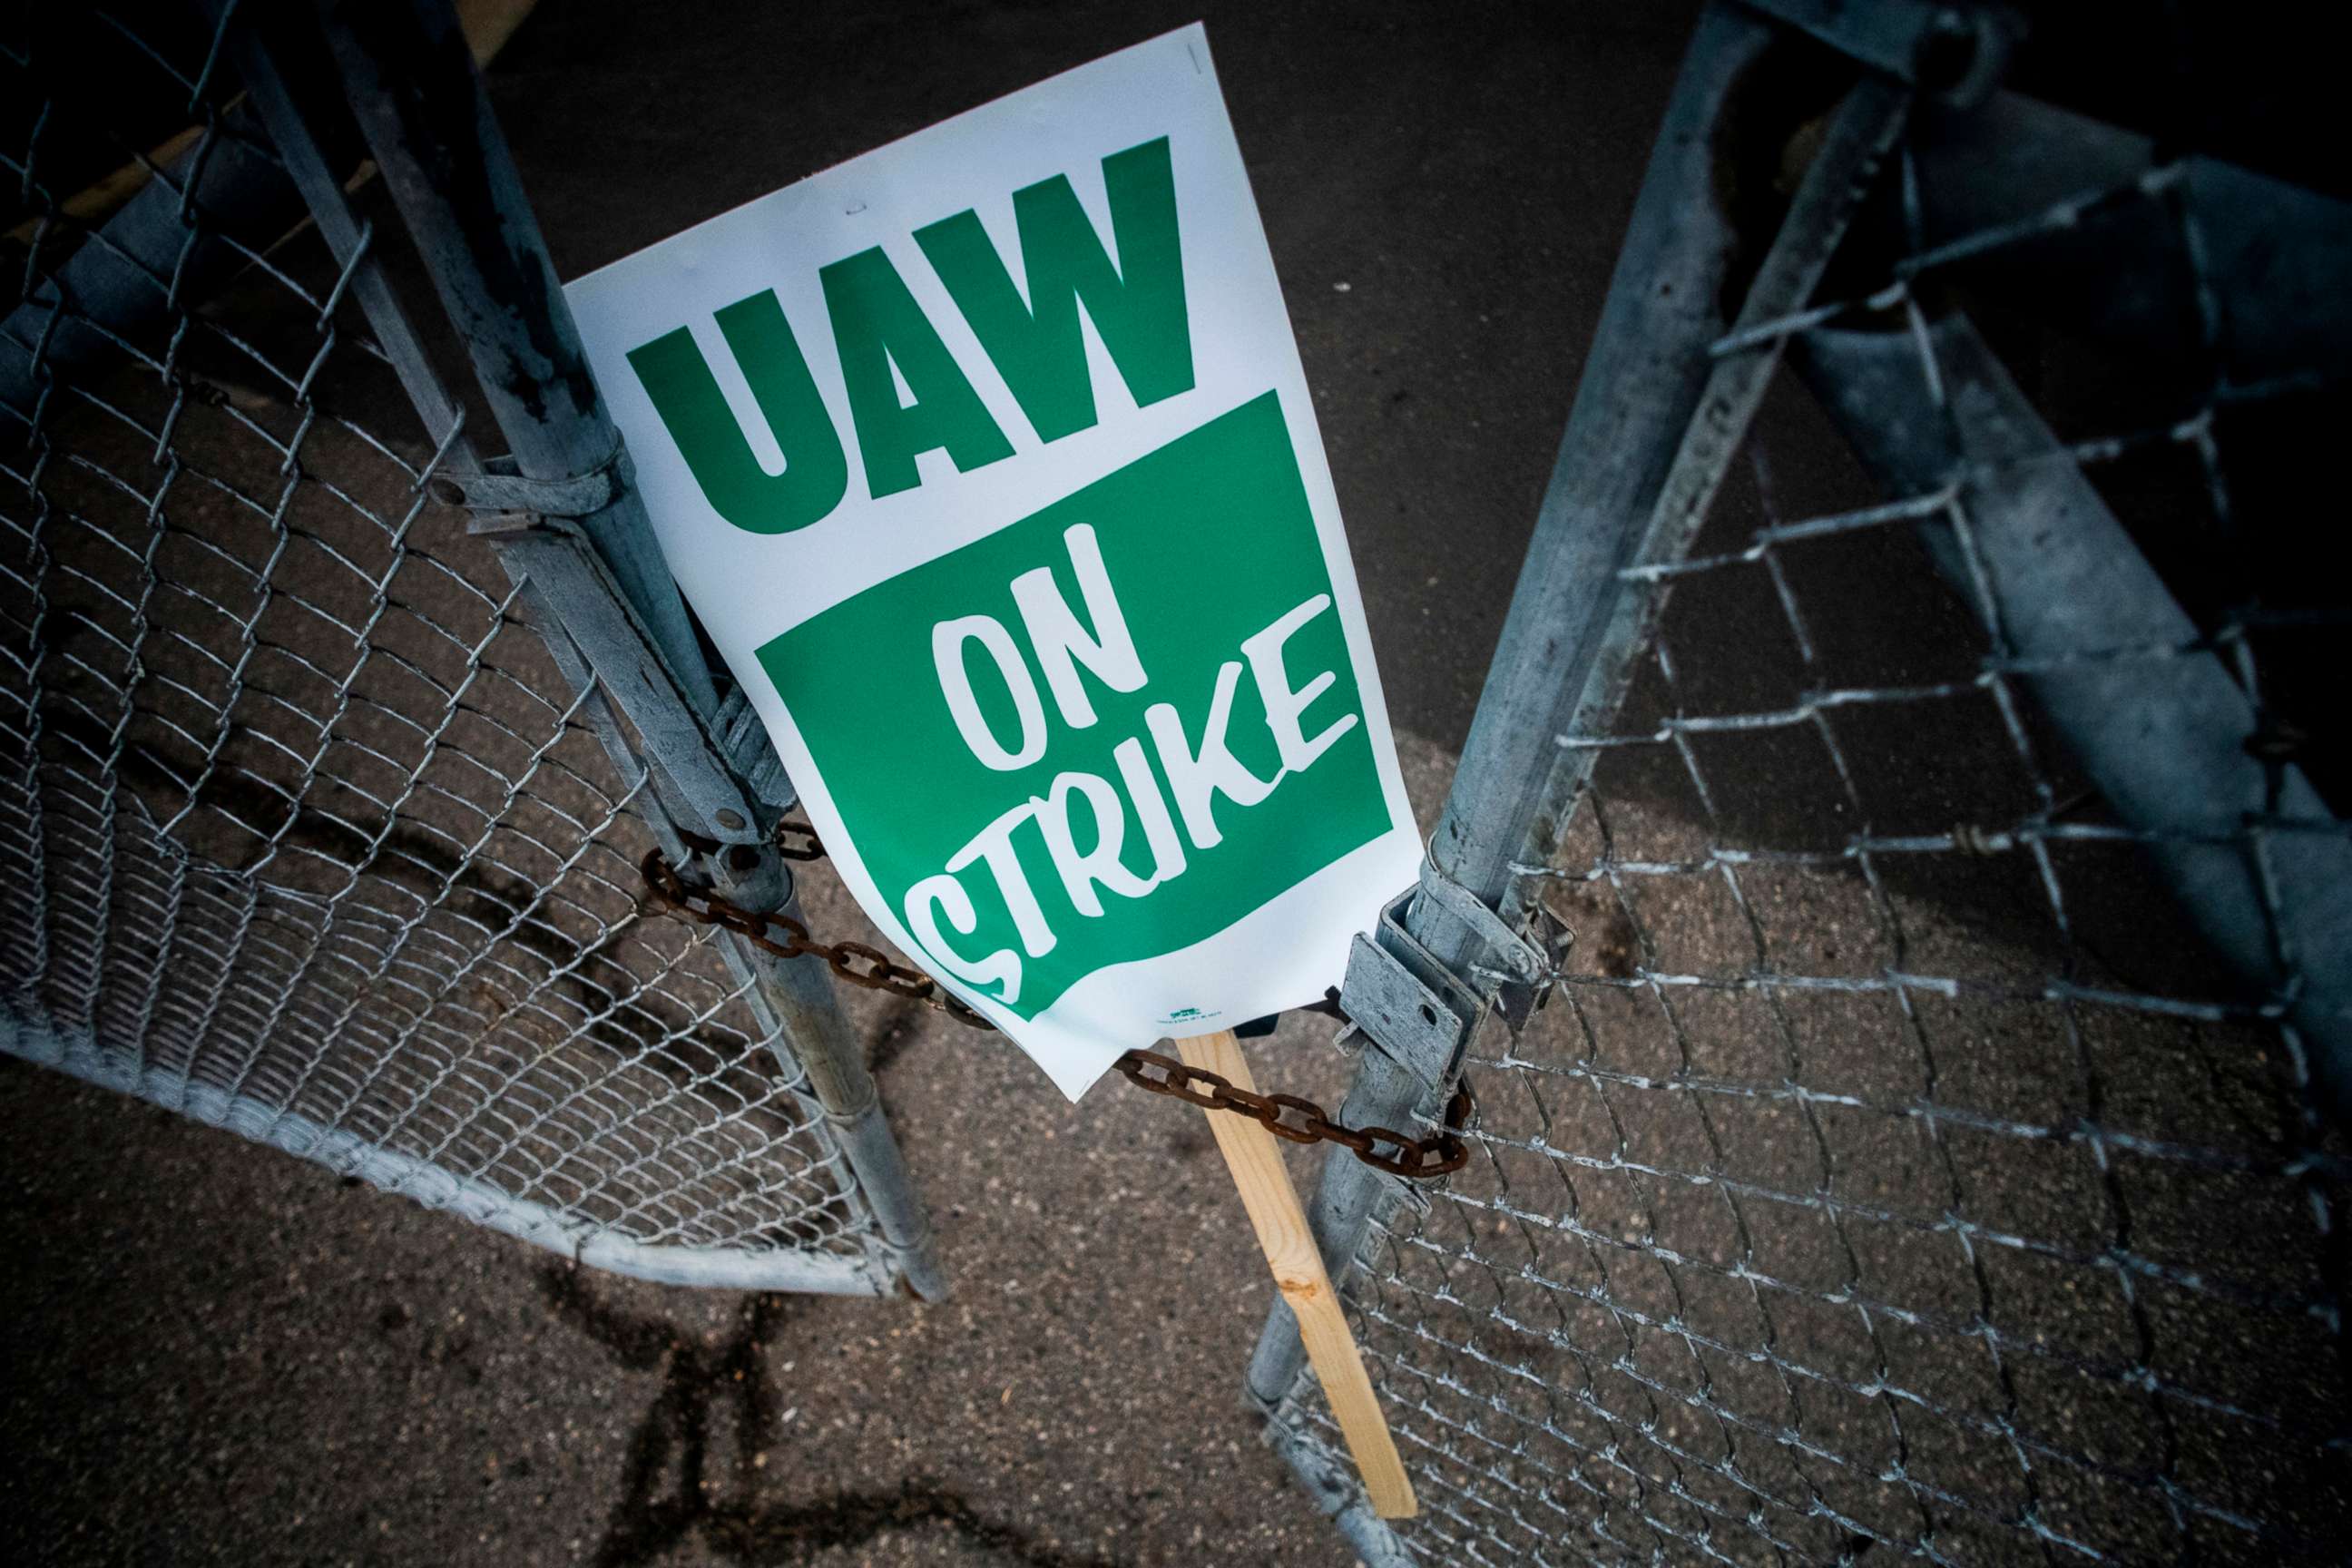 PHOTO: A United Auto Workers strike sign rests between the chains of a locked gate entrance outside of Flint Engine Operations in Flint, Mich., Sept. 16, 2019.